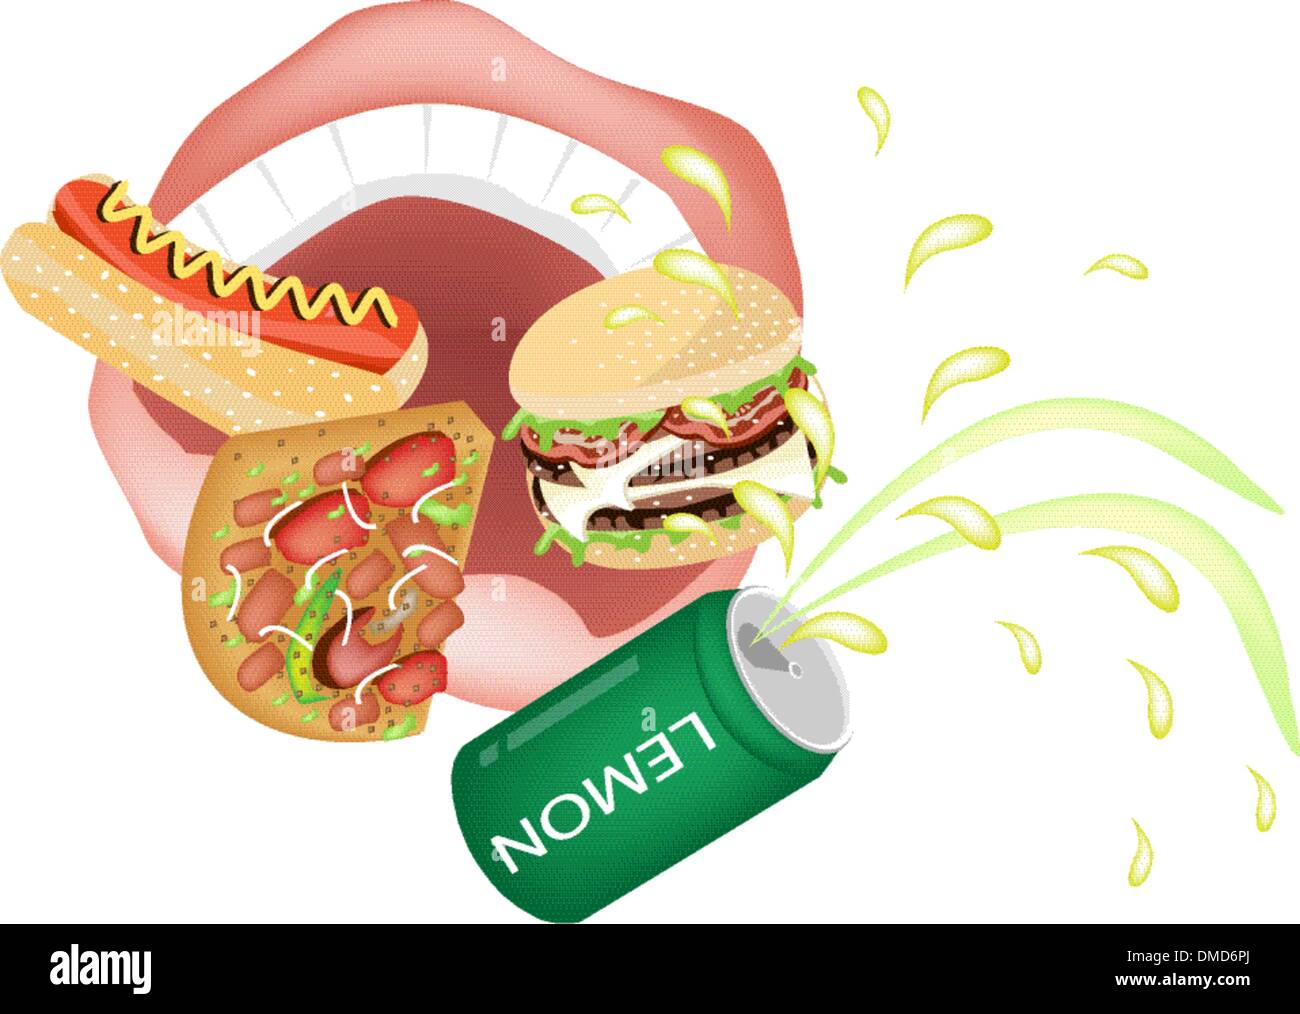 Person Eating Unhealthy Fast Food on White Background Stock Vector